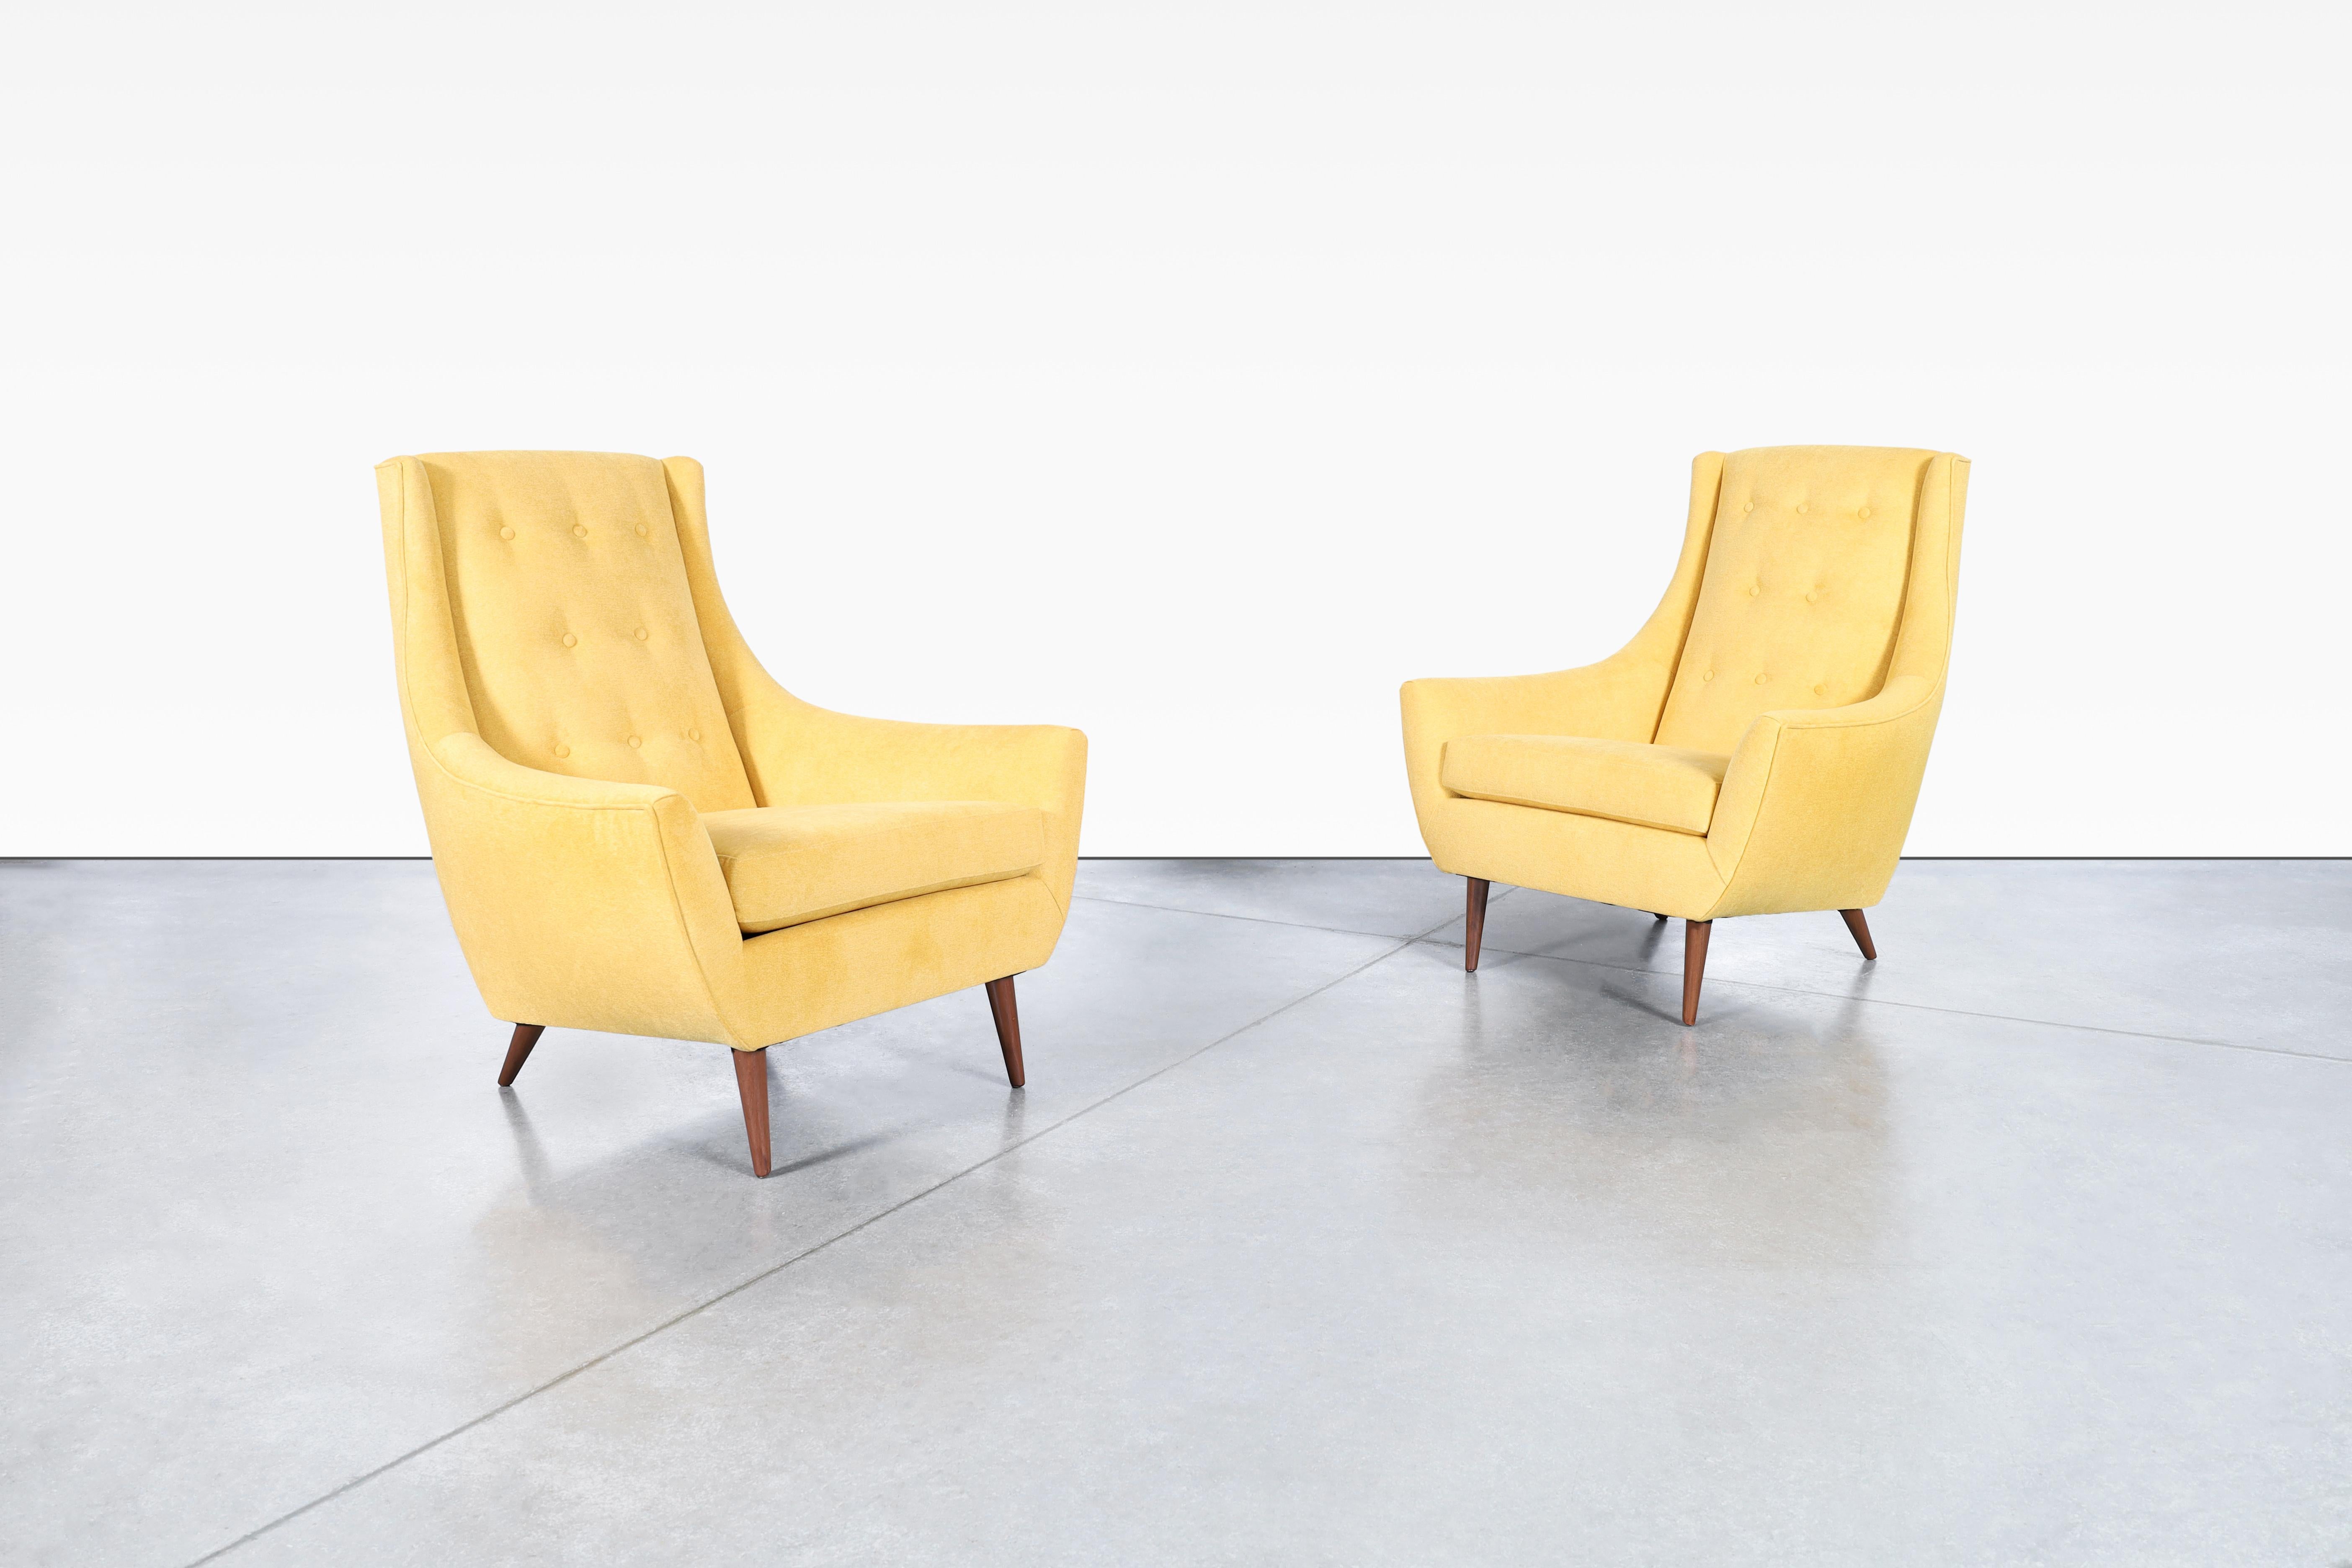 These mid-century modern lounge chairs are a true gem from the 1960s in the United States. The chairs have been refinished and reupholstered to bring them back to their full glory. The curvature design of the chairs, combined with their solid walnut